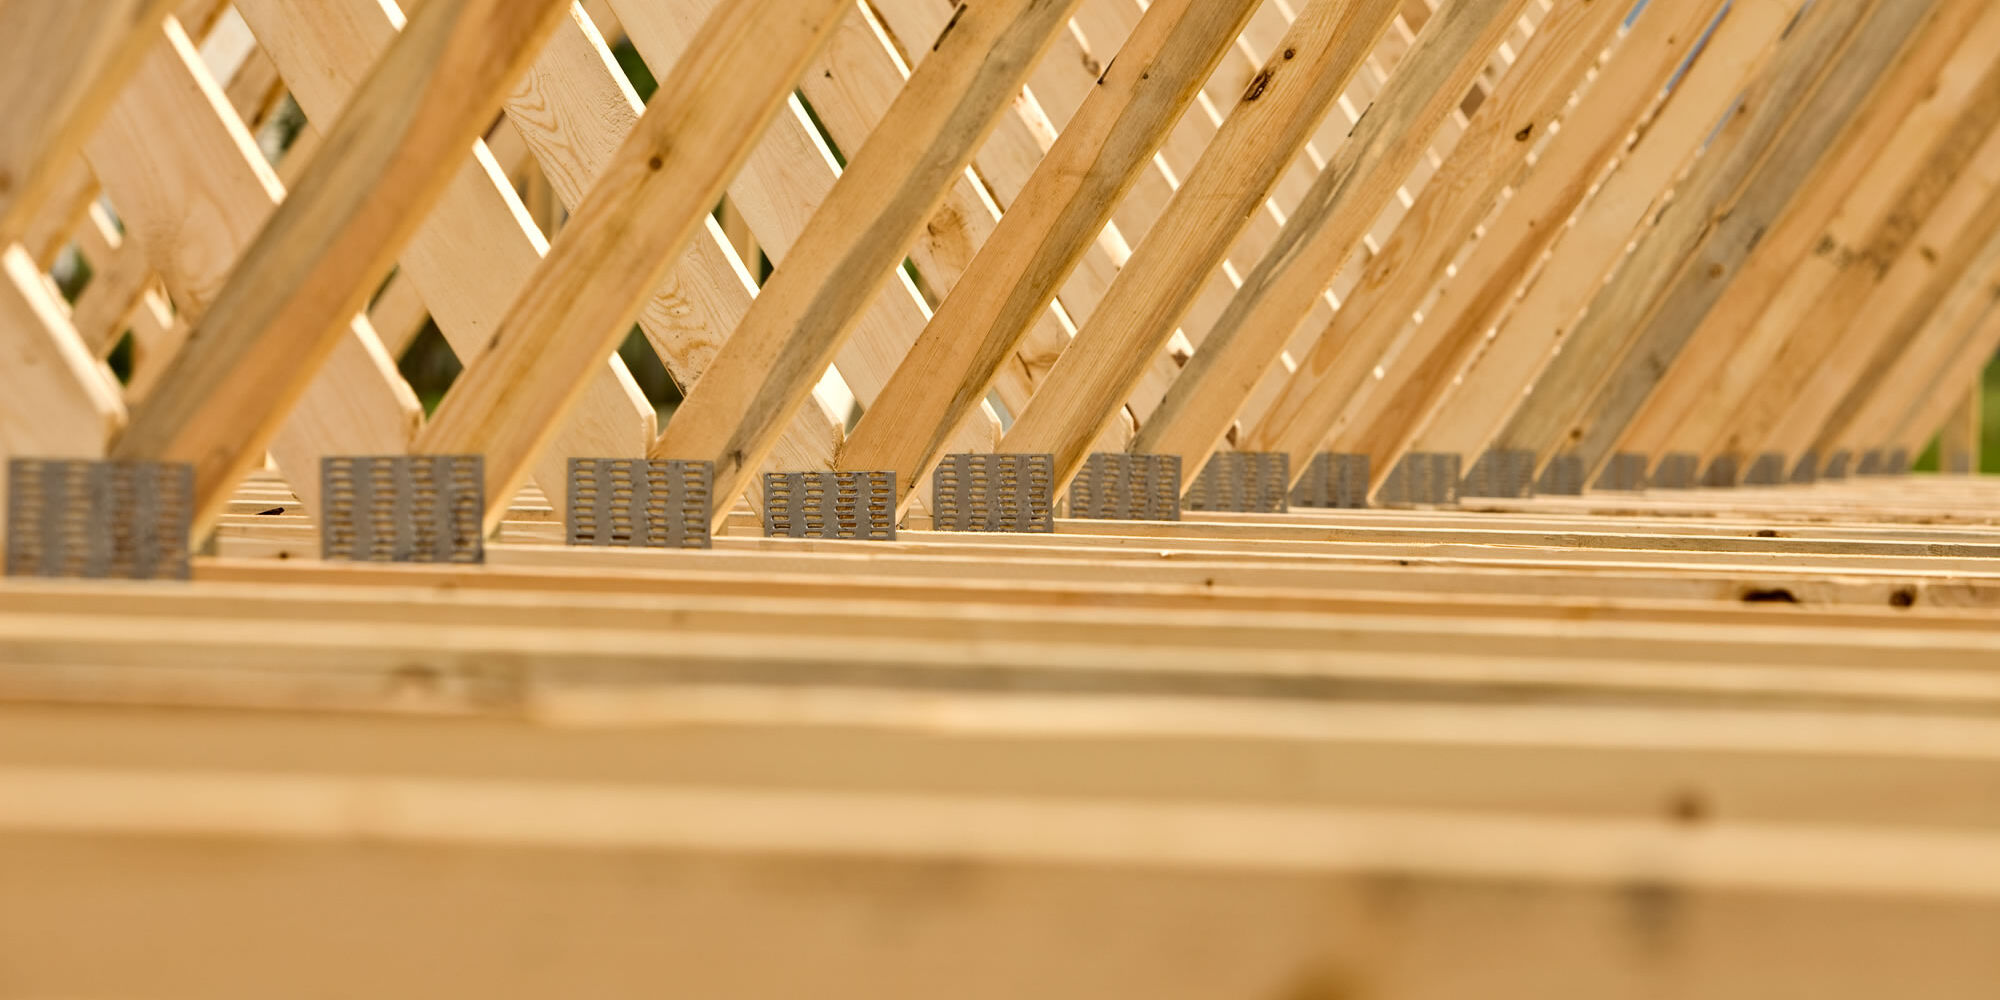 Timber Trusses